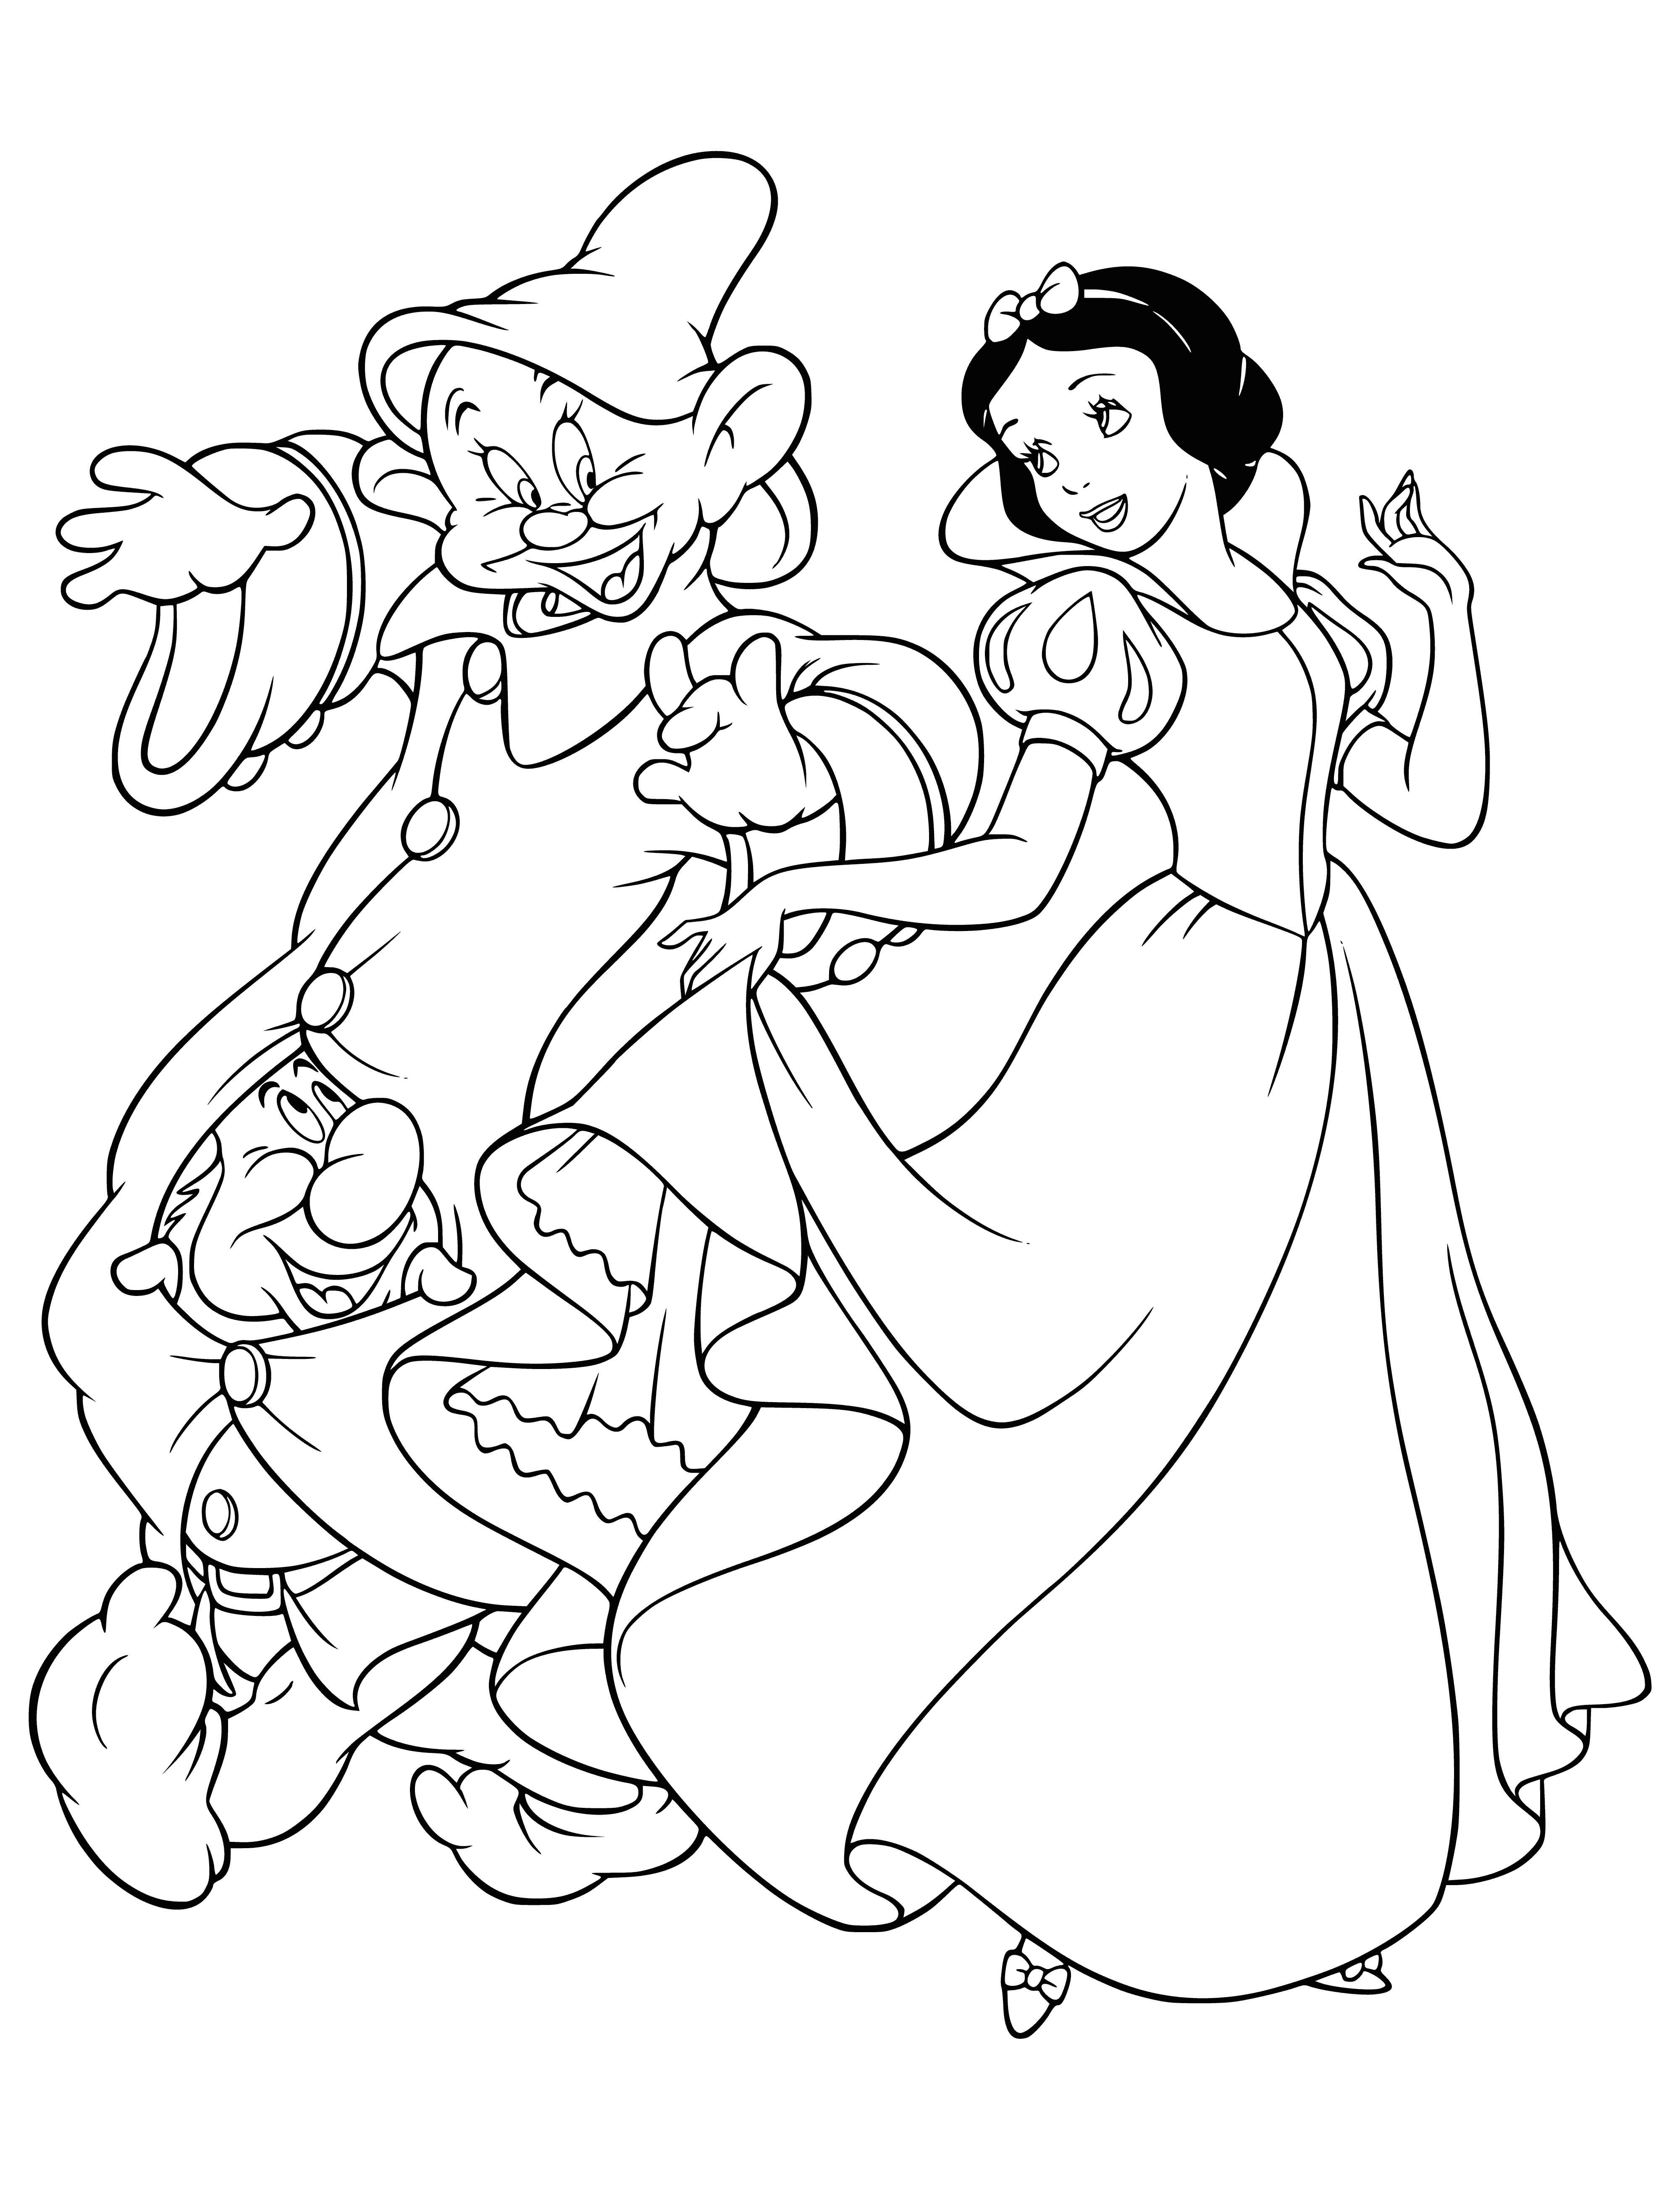 coloring page: The Dwarfs are worriedly gazing at the lifeless Snow White, lying on the ground with her pale face and outspread hair.